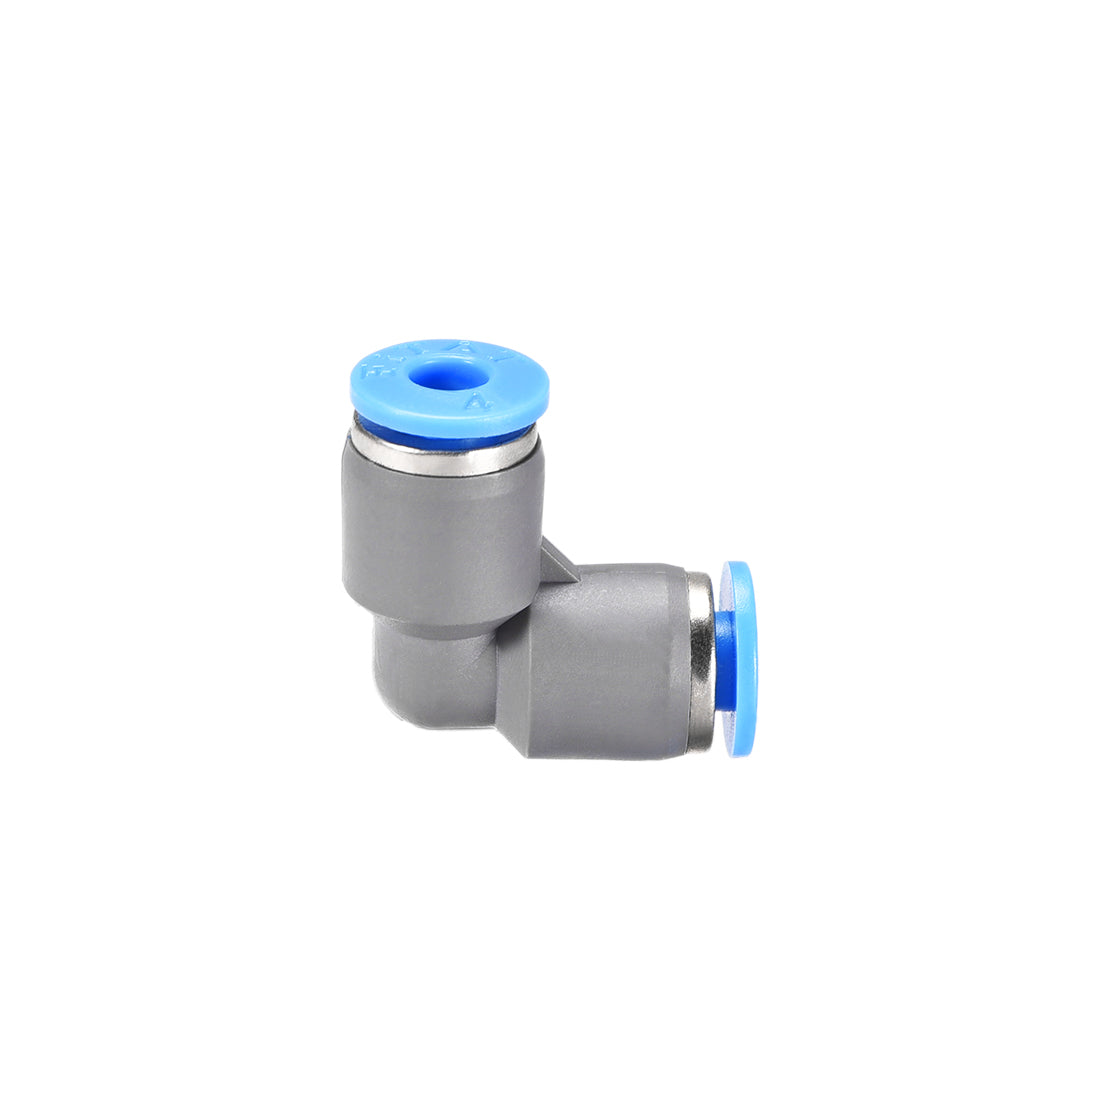 Uxcell Uxcell Elbow Push to Connect Air Fittings 4mm Tube OD Pneumatic Quick Release Connectors Grey 2Pcs